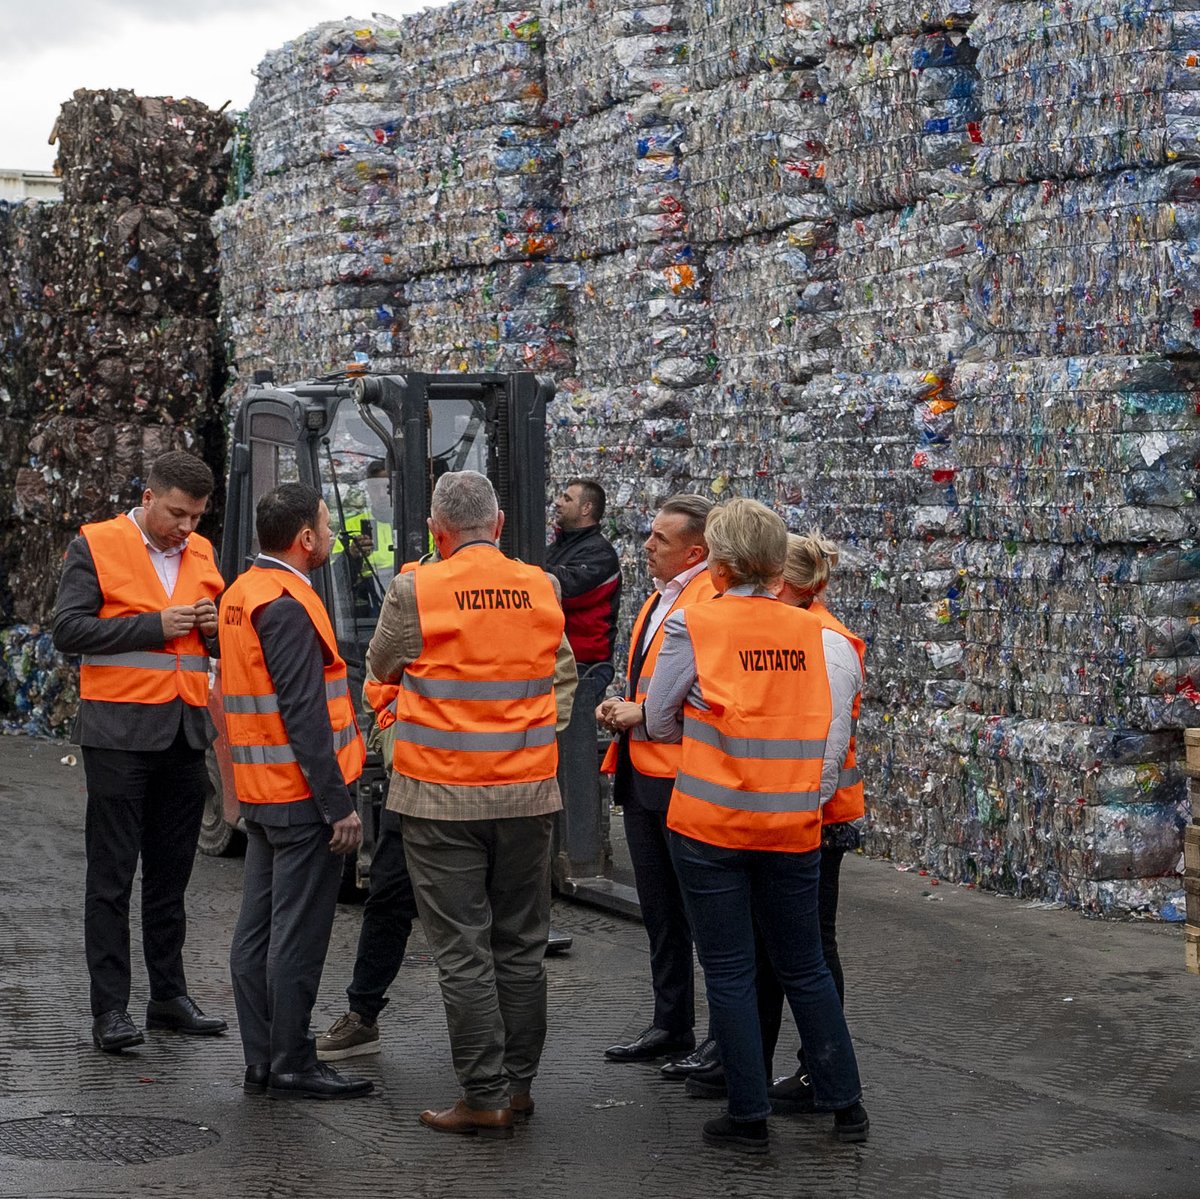 We had the pleasure to welcome the Romanian Environment Minister, Mircea Fechet, to our recycling plant in Târgu Mureș. ♻️ Thank you for your visit! 🙏

#FamilyOfPioneers #Sustainability #Packaging #SustainablePackaging #CircularEconomy #Recycling #PlasticIsFantastic